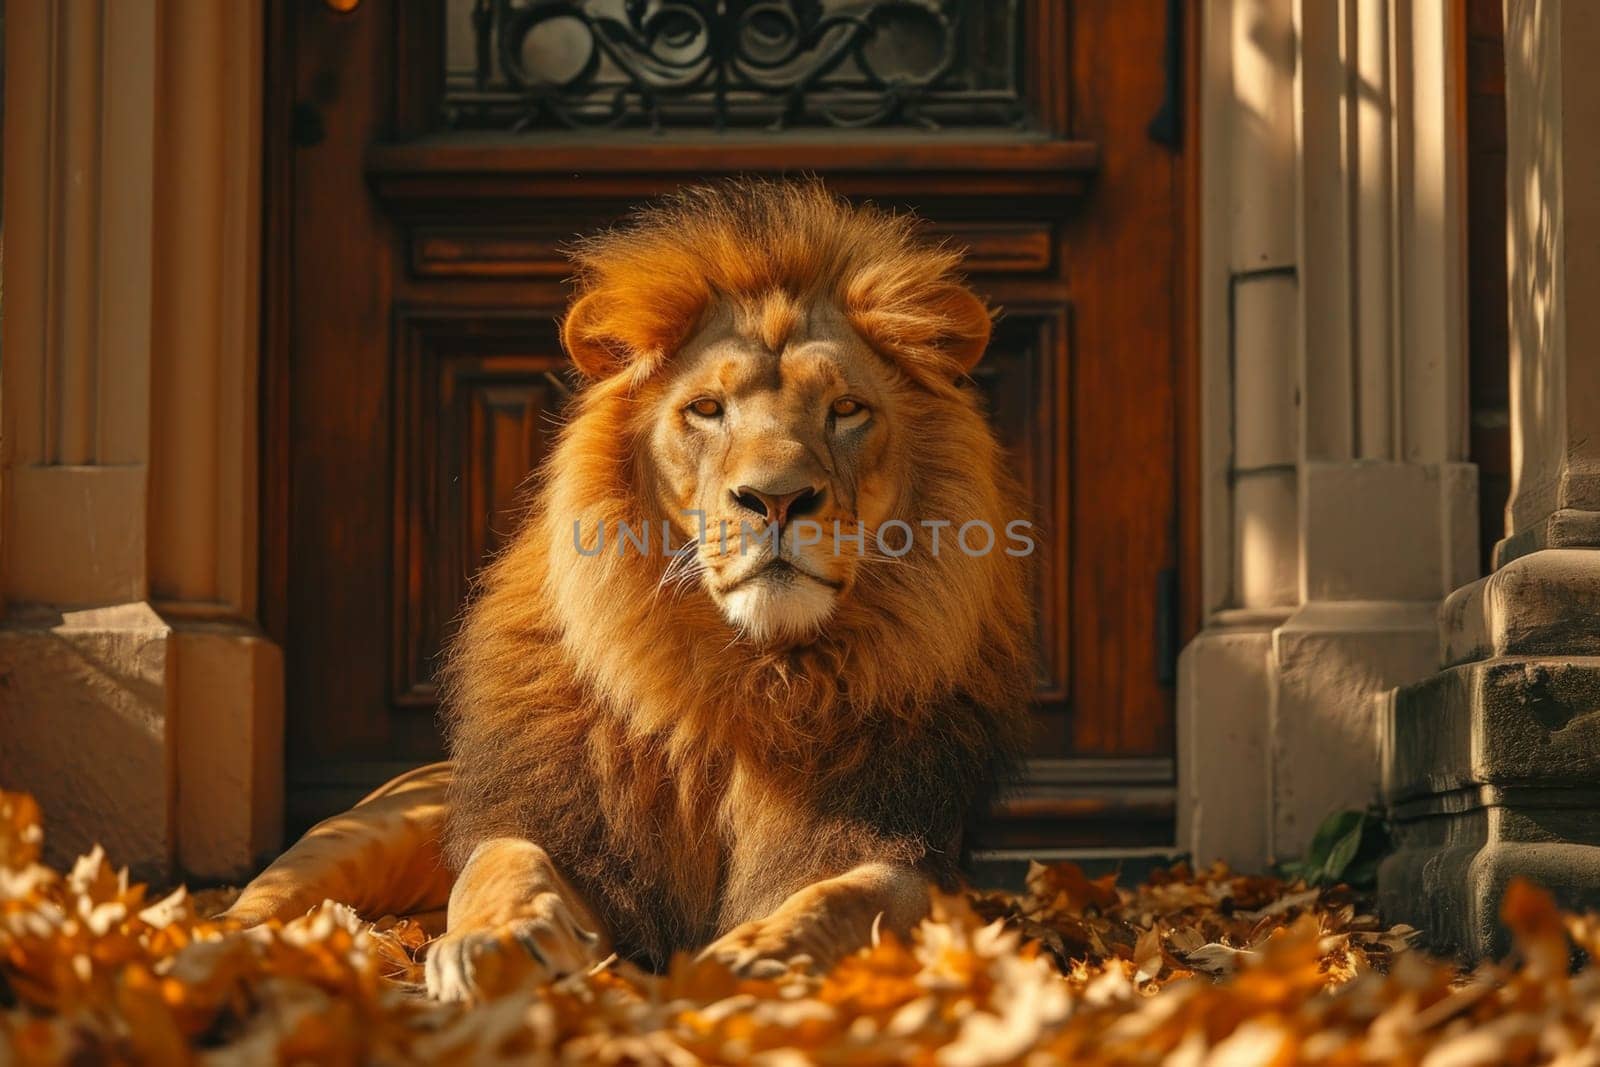 A big lion is sitting guarding the front door of the house by Lobachad